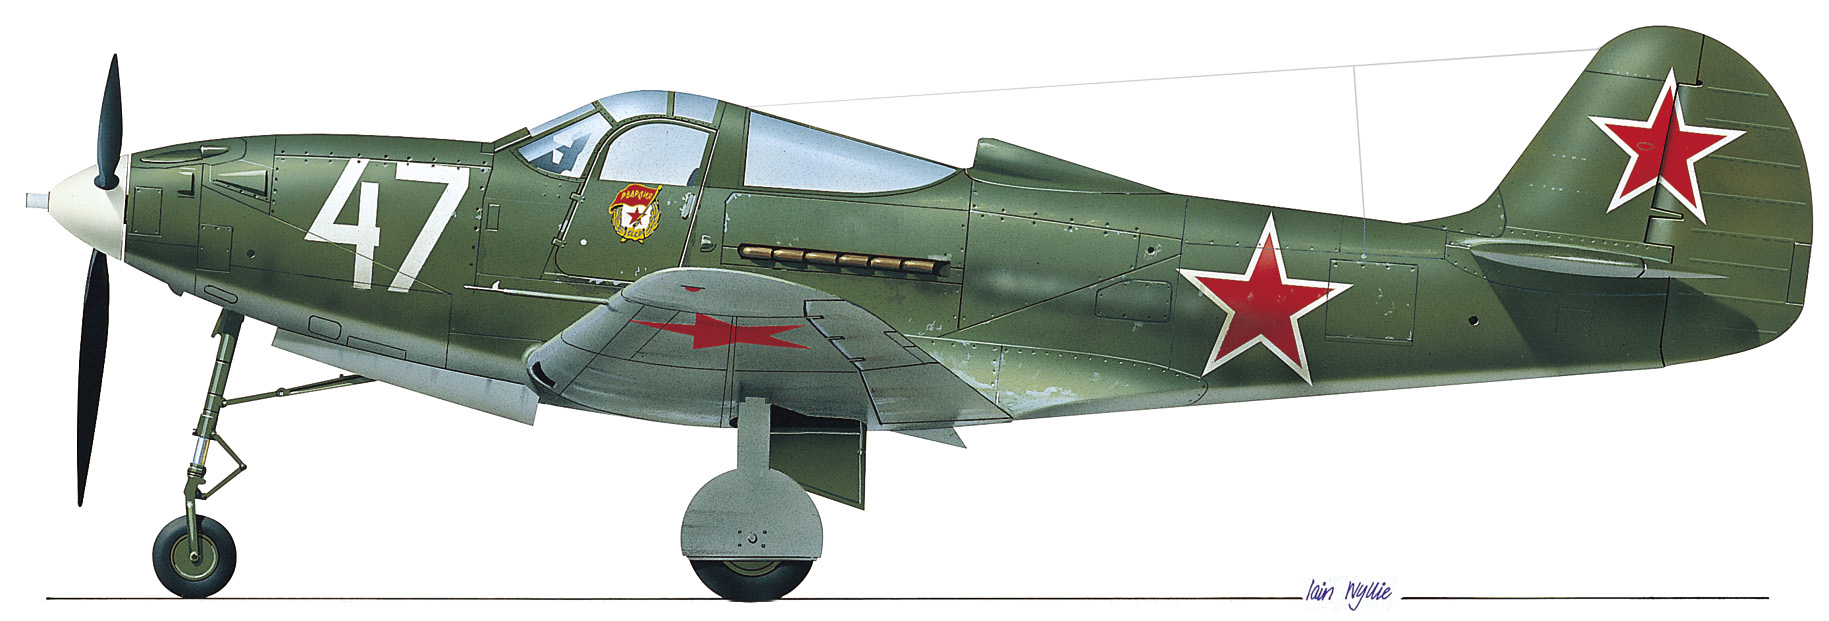 Sporting Red Air Force markings, this P-39 Airacobra is typical of the approximately 5,000 such fighters supplied to the Soviets during the Lend-Lease program by way of Alaska.